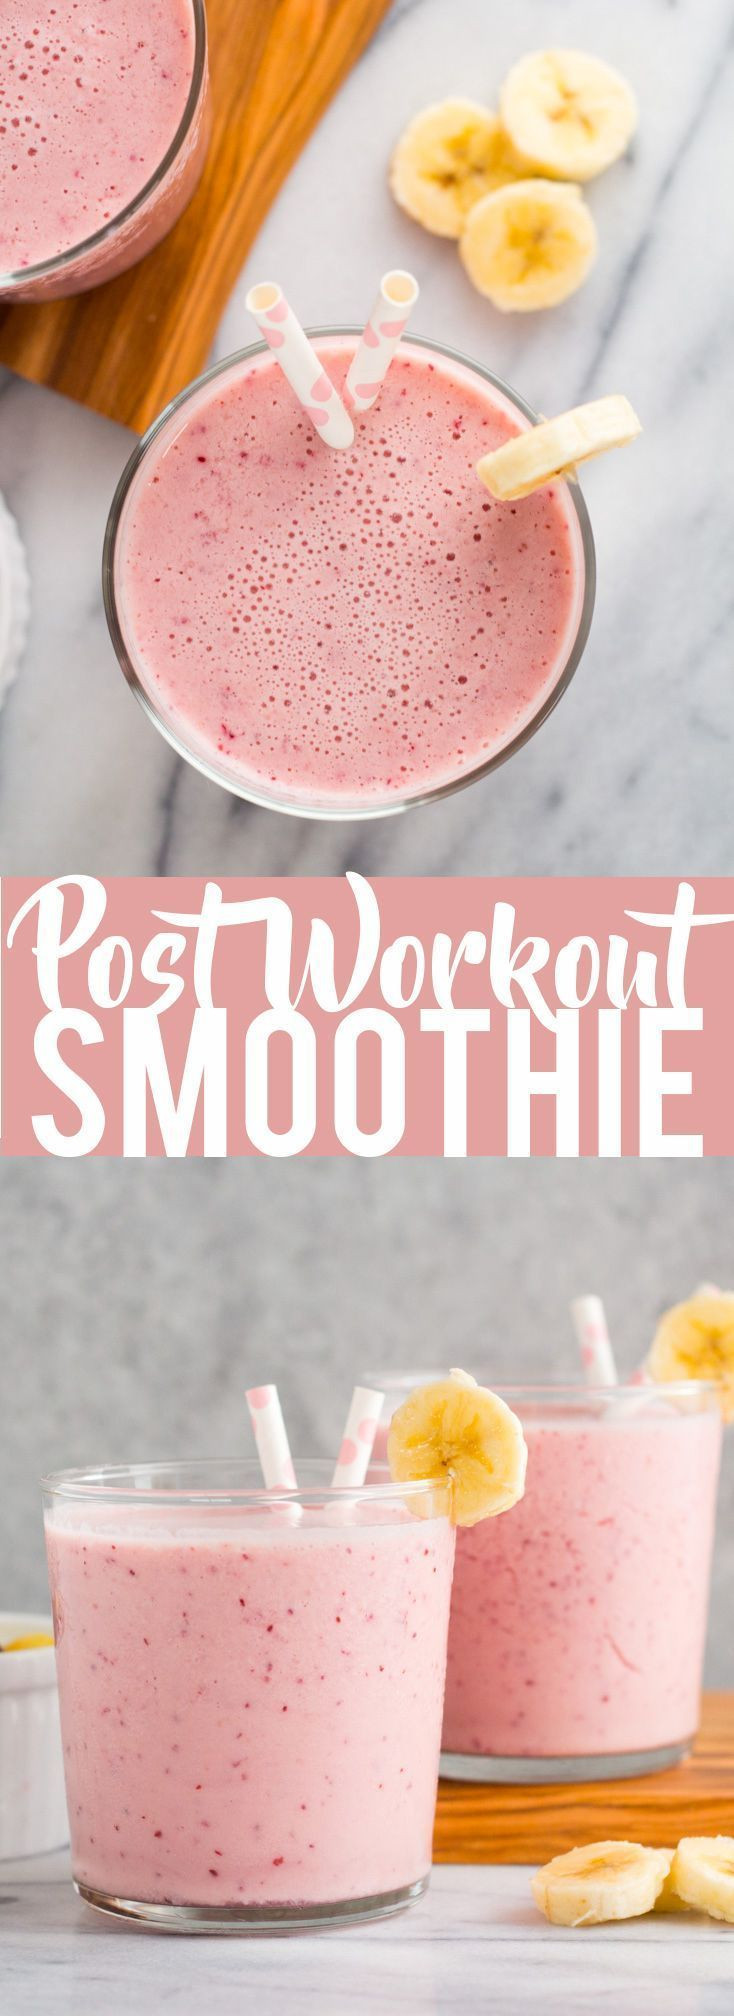 Healthy Smoothies After Workout
 Best 25 Post Workout Smoothie ideas on Pinterest